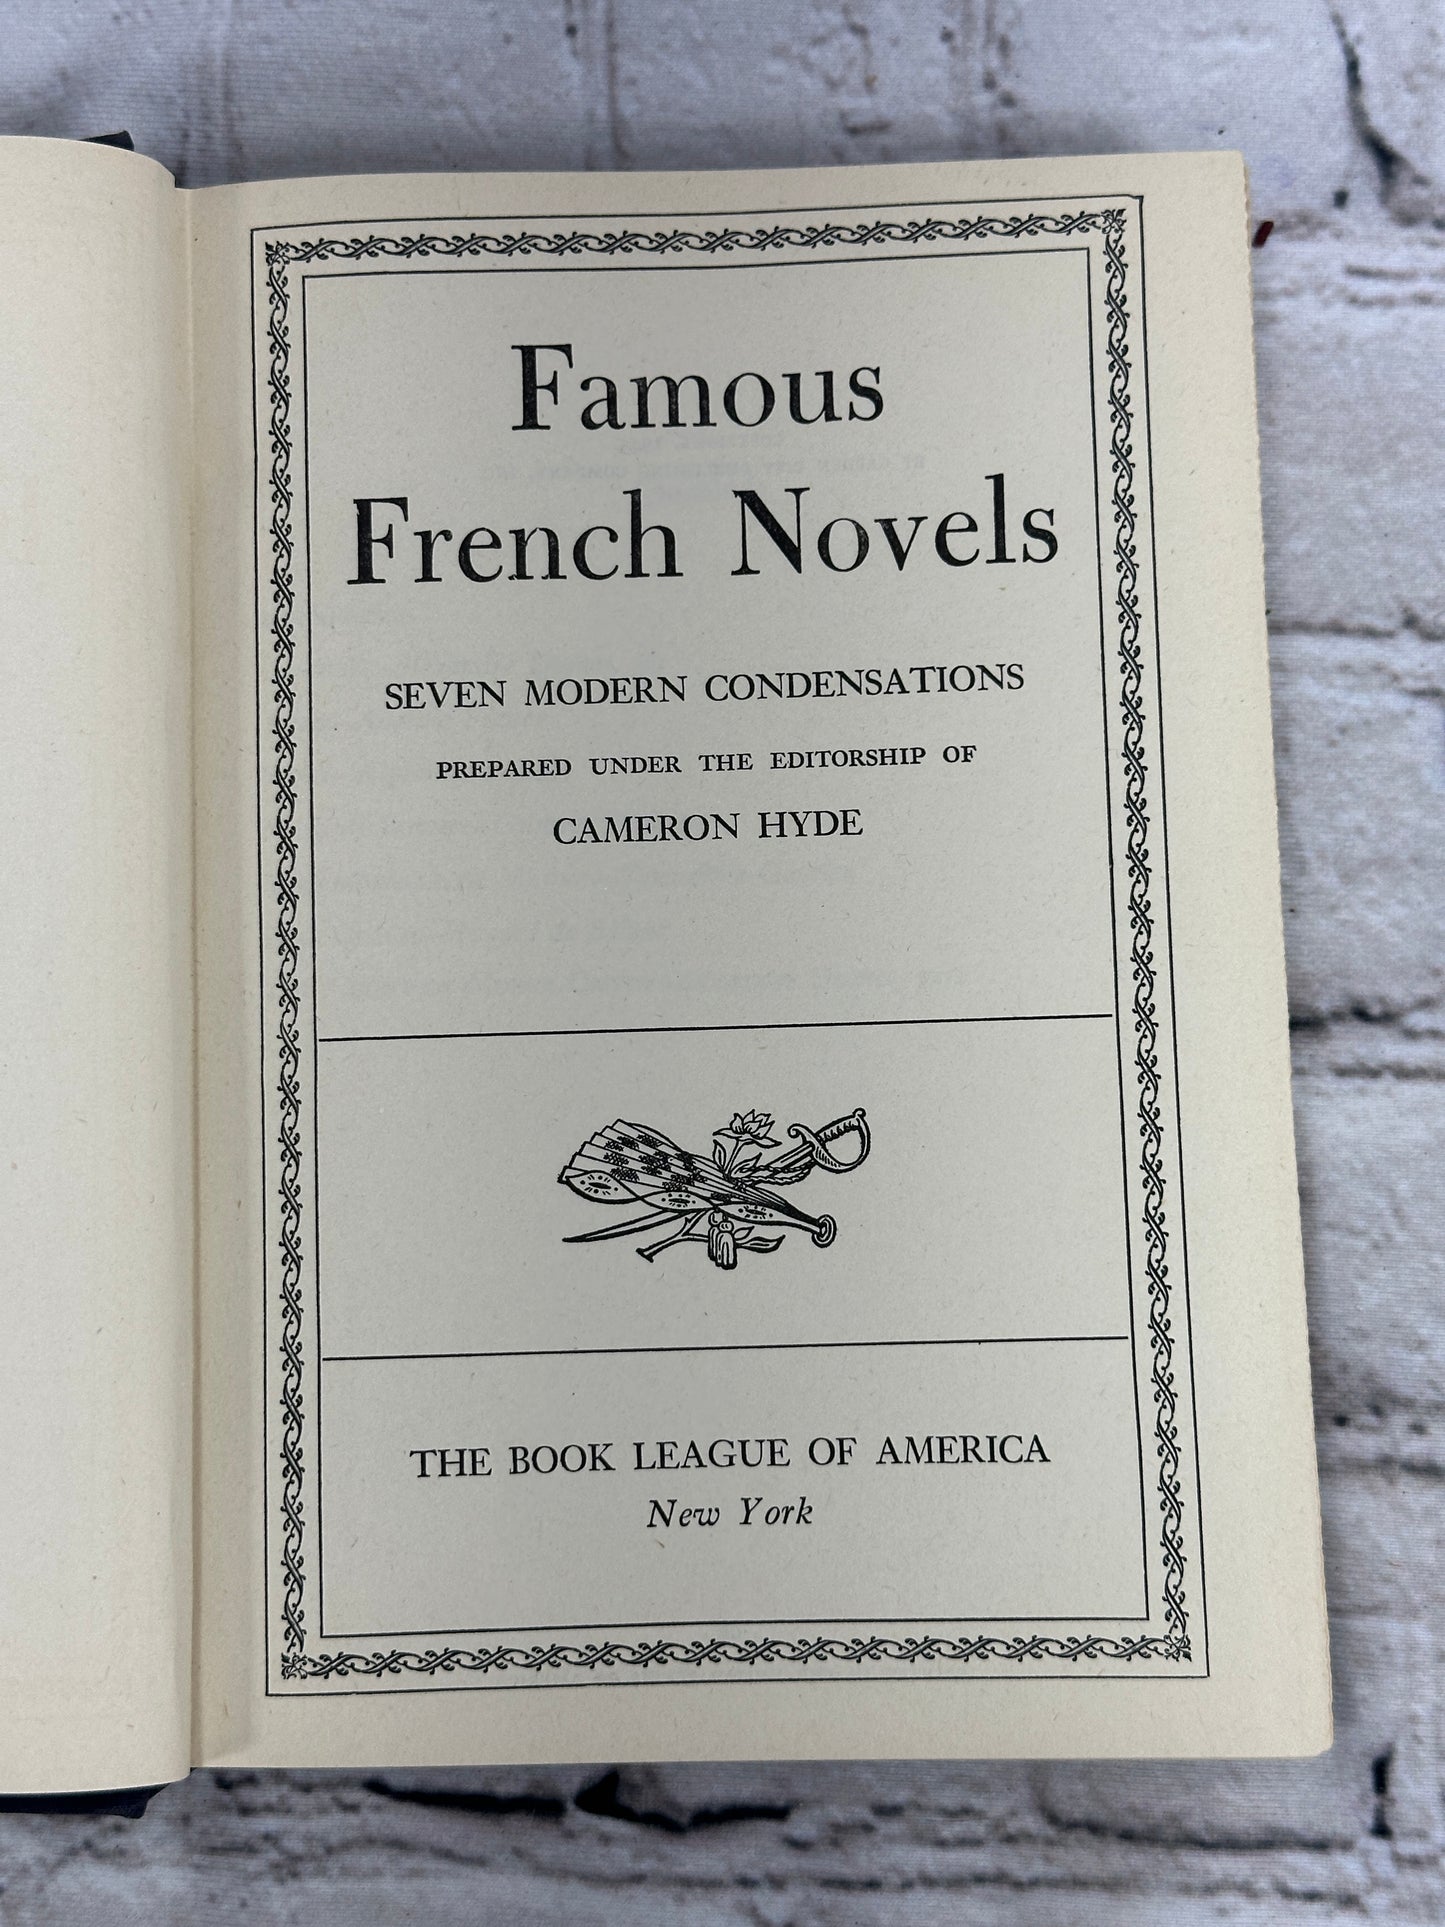 Famous French Novels: Seven Modern Condensations ed. by Cameron Hyde [1943]